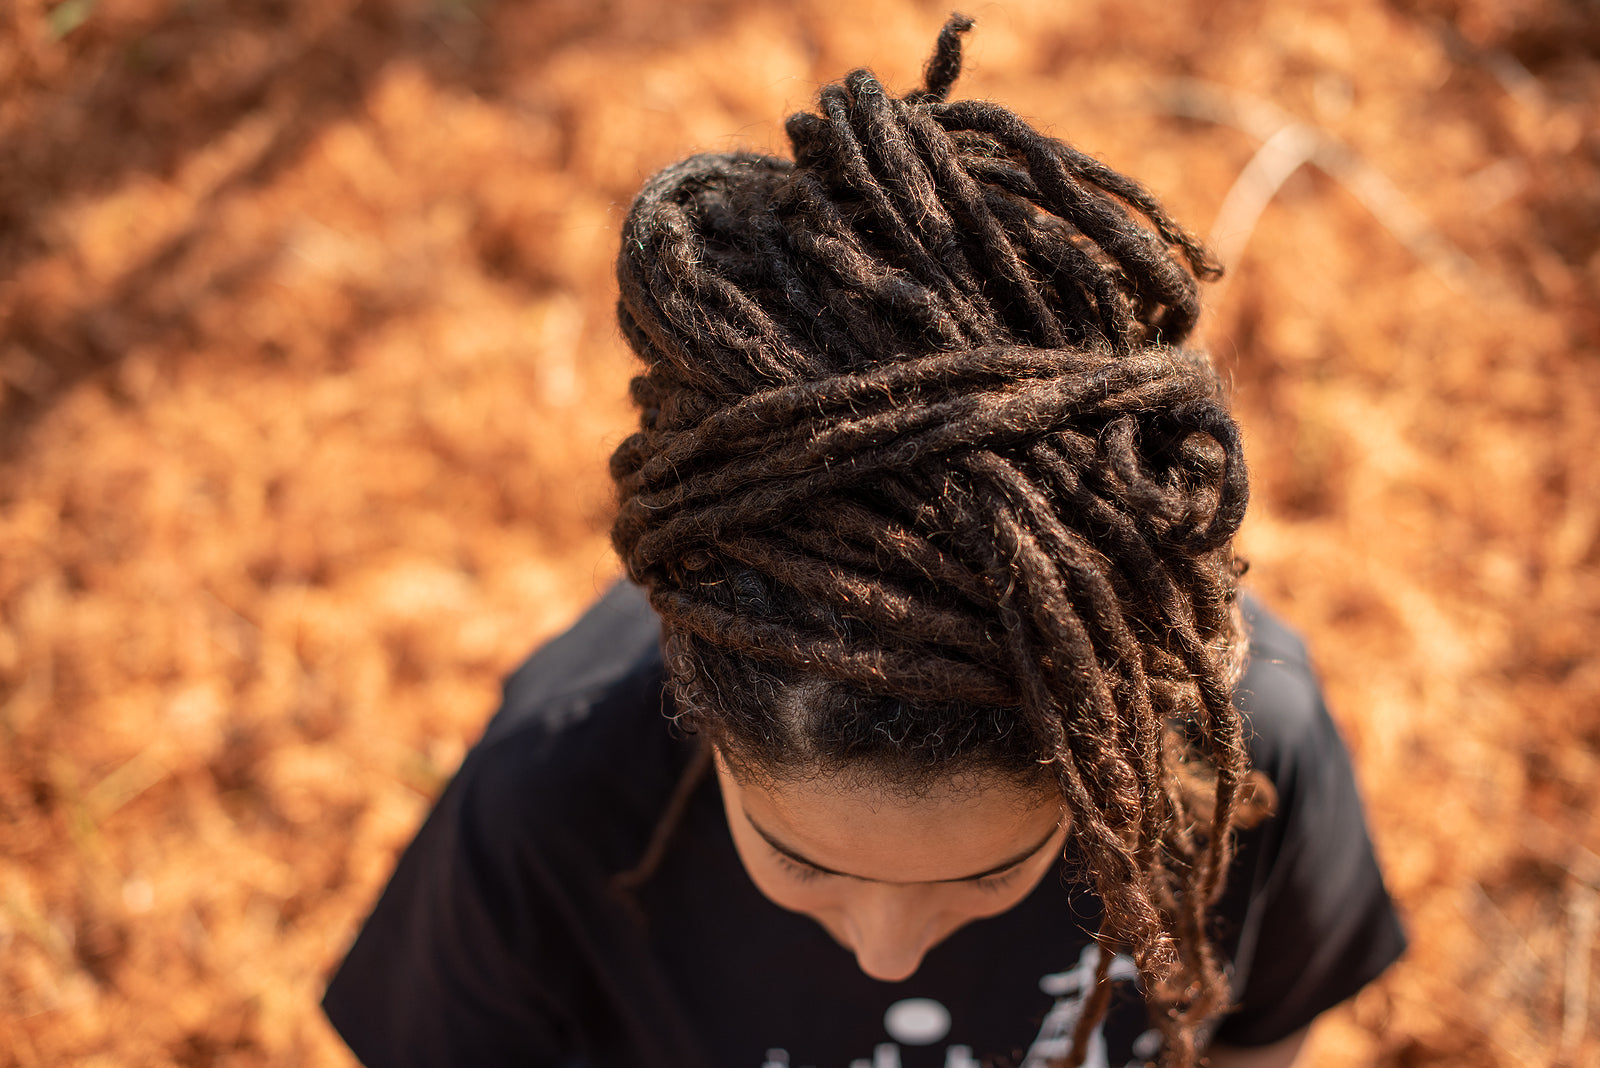 Essential Tool For Dreadlocks: How To Use A Dreadlock Comb